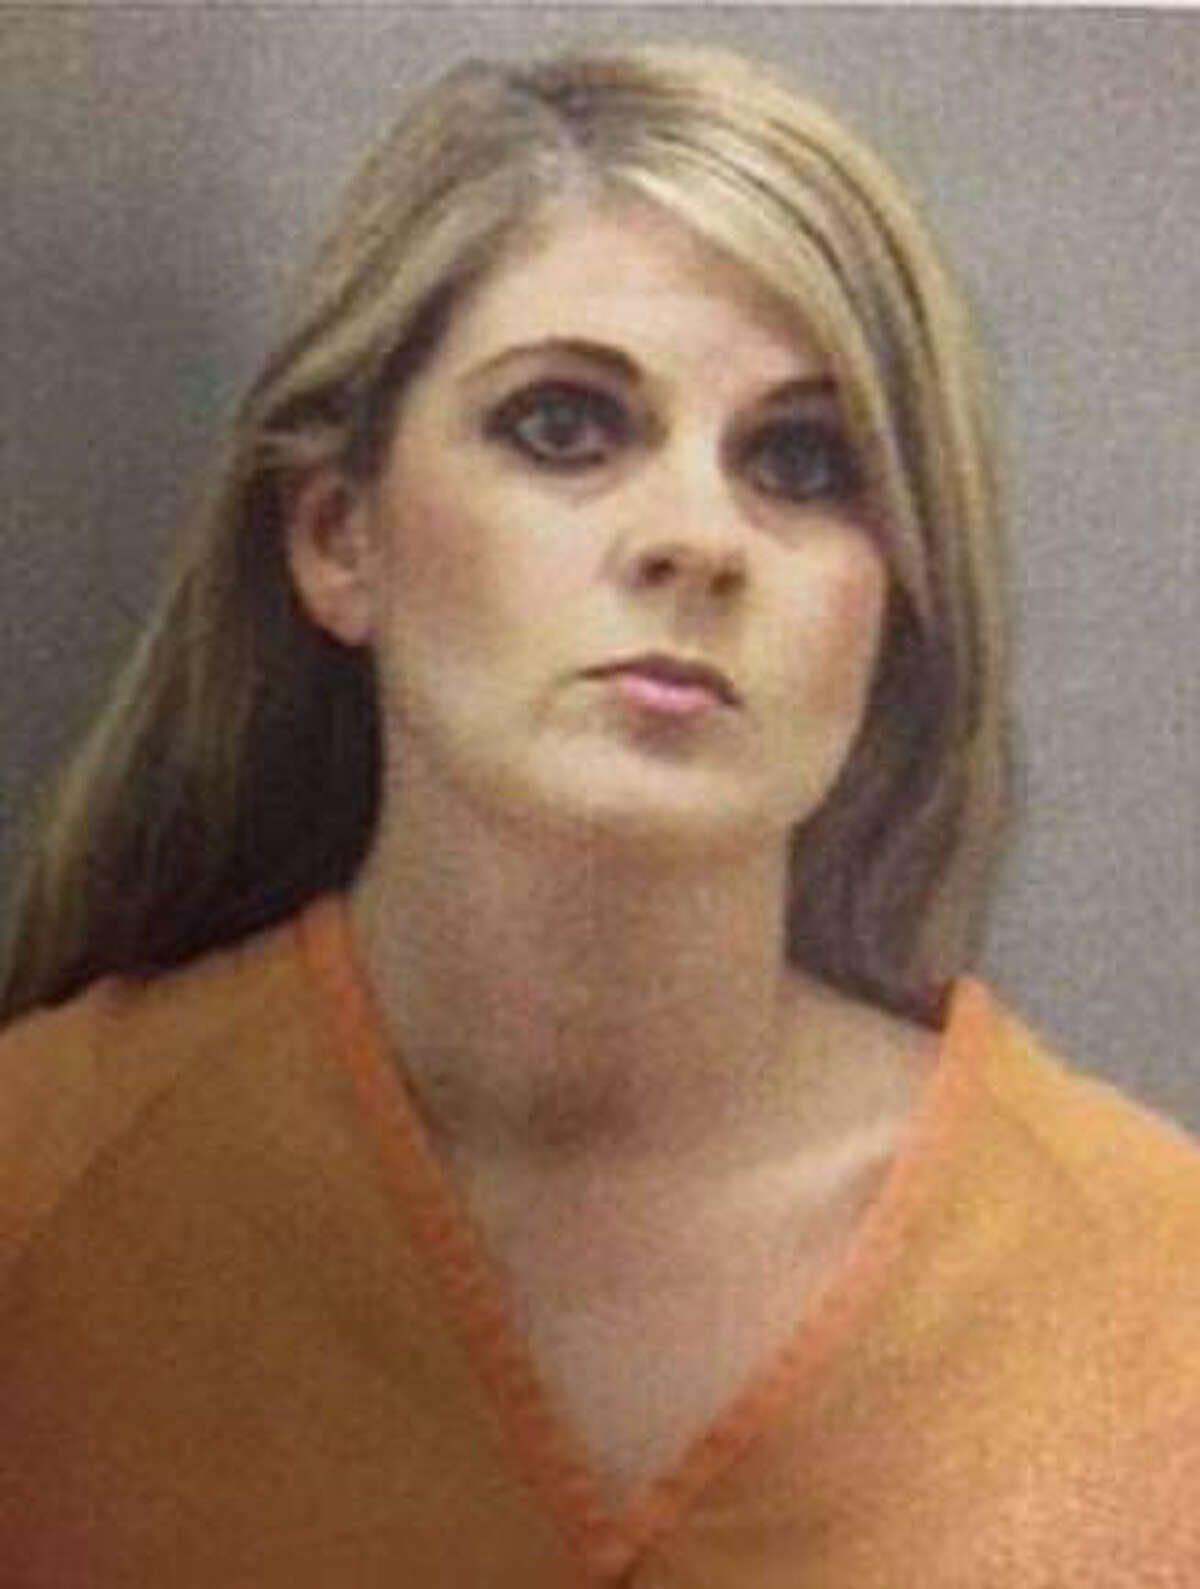 Erika Diebel, 41, faces charges of intoxication manslaughter with a vehicle in an April wreck that killed 8-year-old Kelsey Nalepa in League City. Diebel is accused of slamming her Jeep Grand Cherokee into the back of a stopped Ford Expedition.